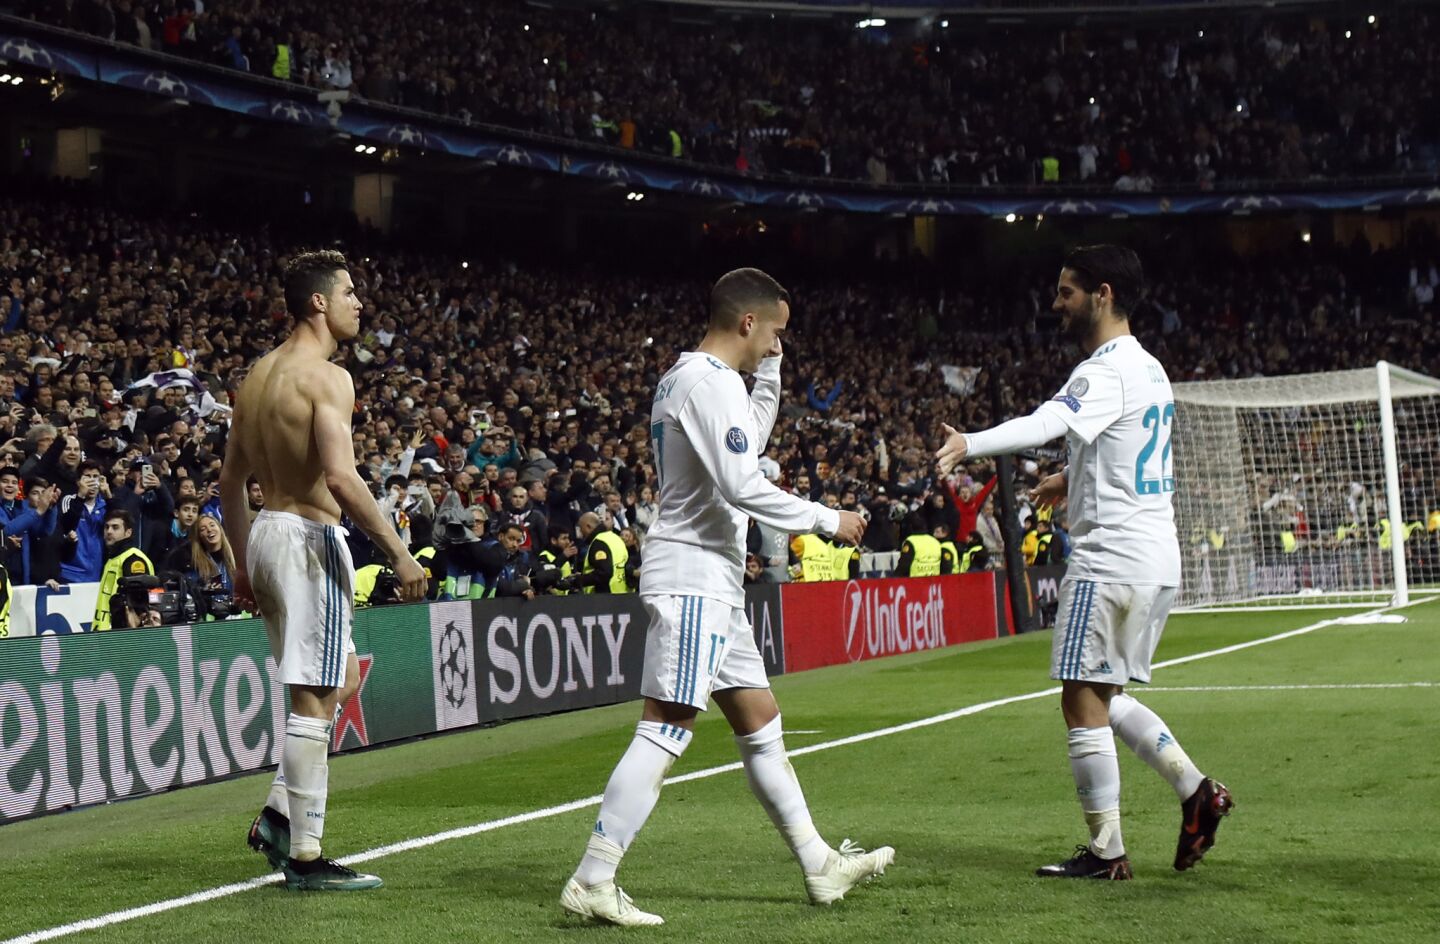 Real Madrid's Portuguese forward Cristiano Ronaldo (L) celebrates with Real Madrid's Spanish midfielder Lucas Vazquez and Real Madrid's Spanish midfielder Isco after scoring during the UEFA Champions League quarter-final second leg football match between Real Madrid CF and Juventus FC at the Santiago Bernabeu stadium in Madrid on April 11, 2018. / AFP PHOTO / OSCAR DEL POZOOSCAR DEL POZO/AFP/Getty Images ** OUTS - ELSENT, FPG, CM - OUTS * NM, PH, VA if sourced by CT, LA or MoD **